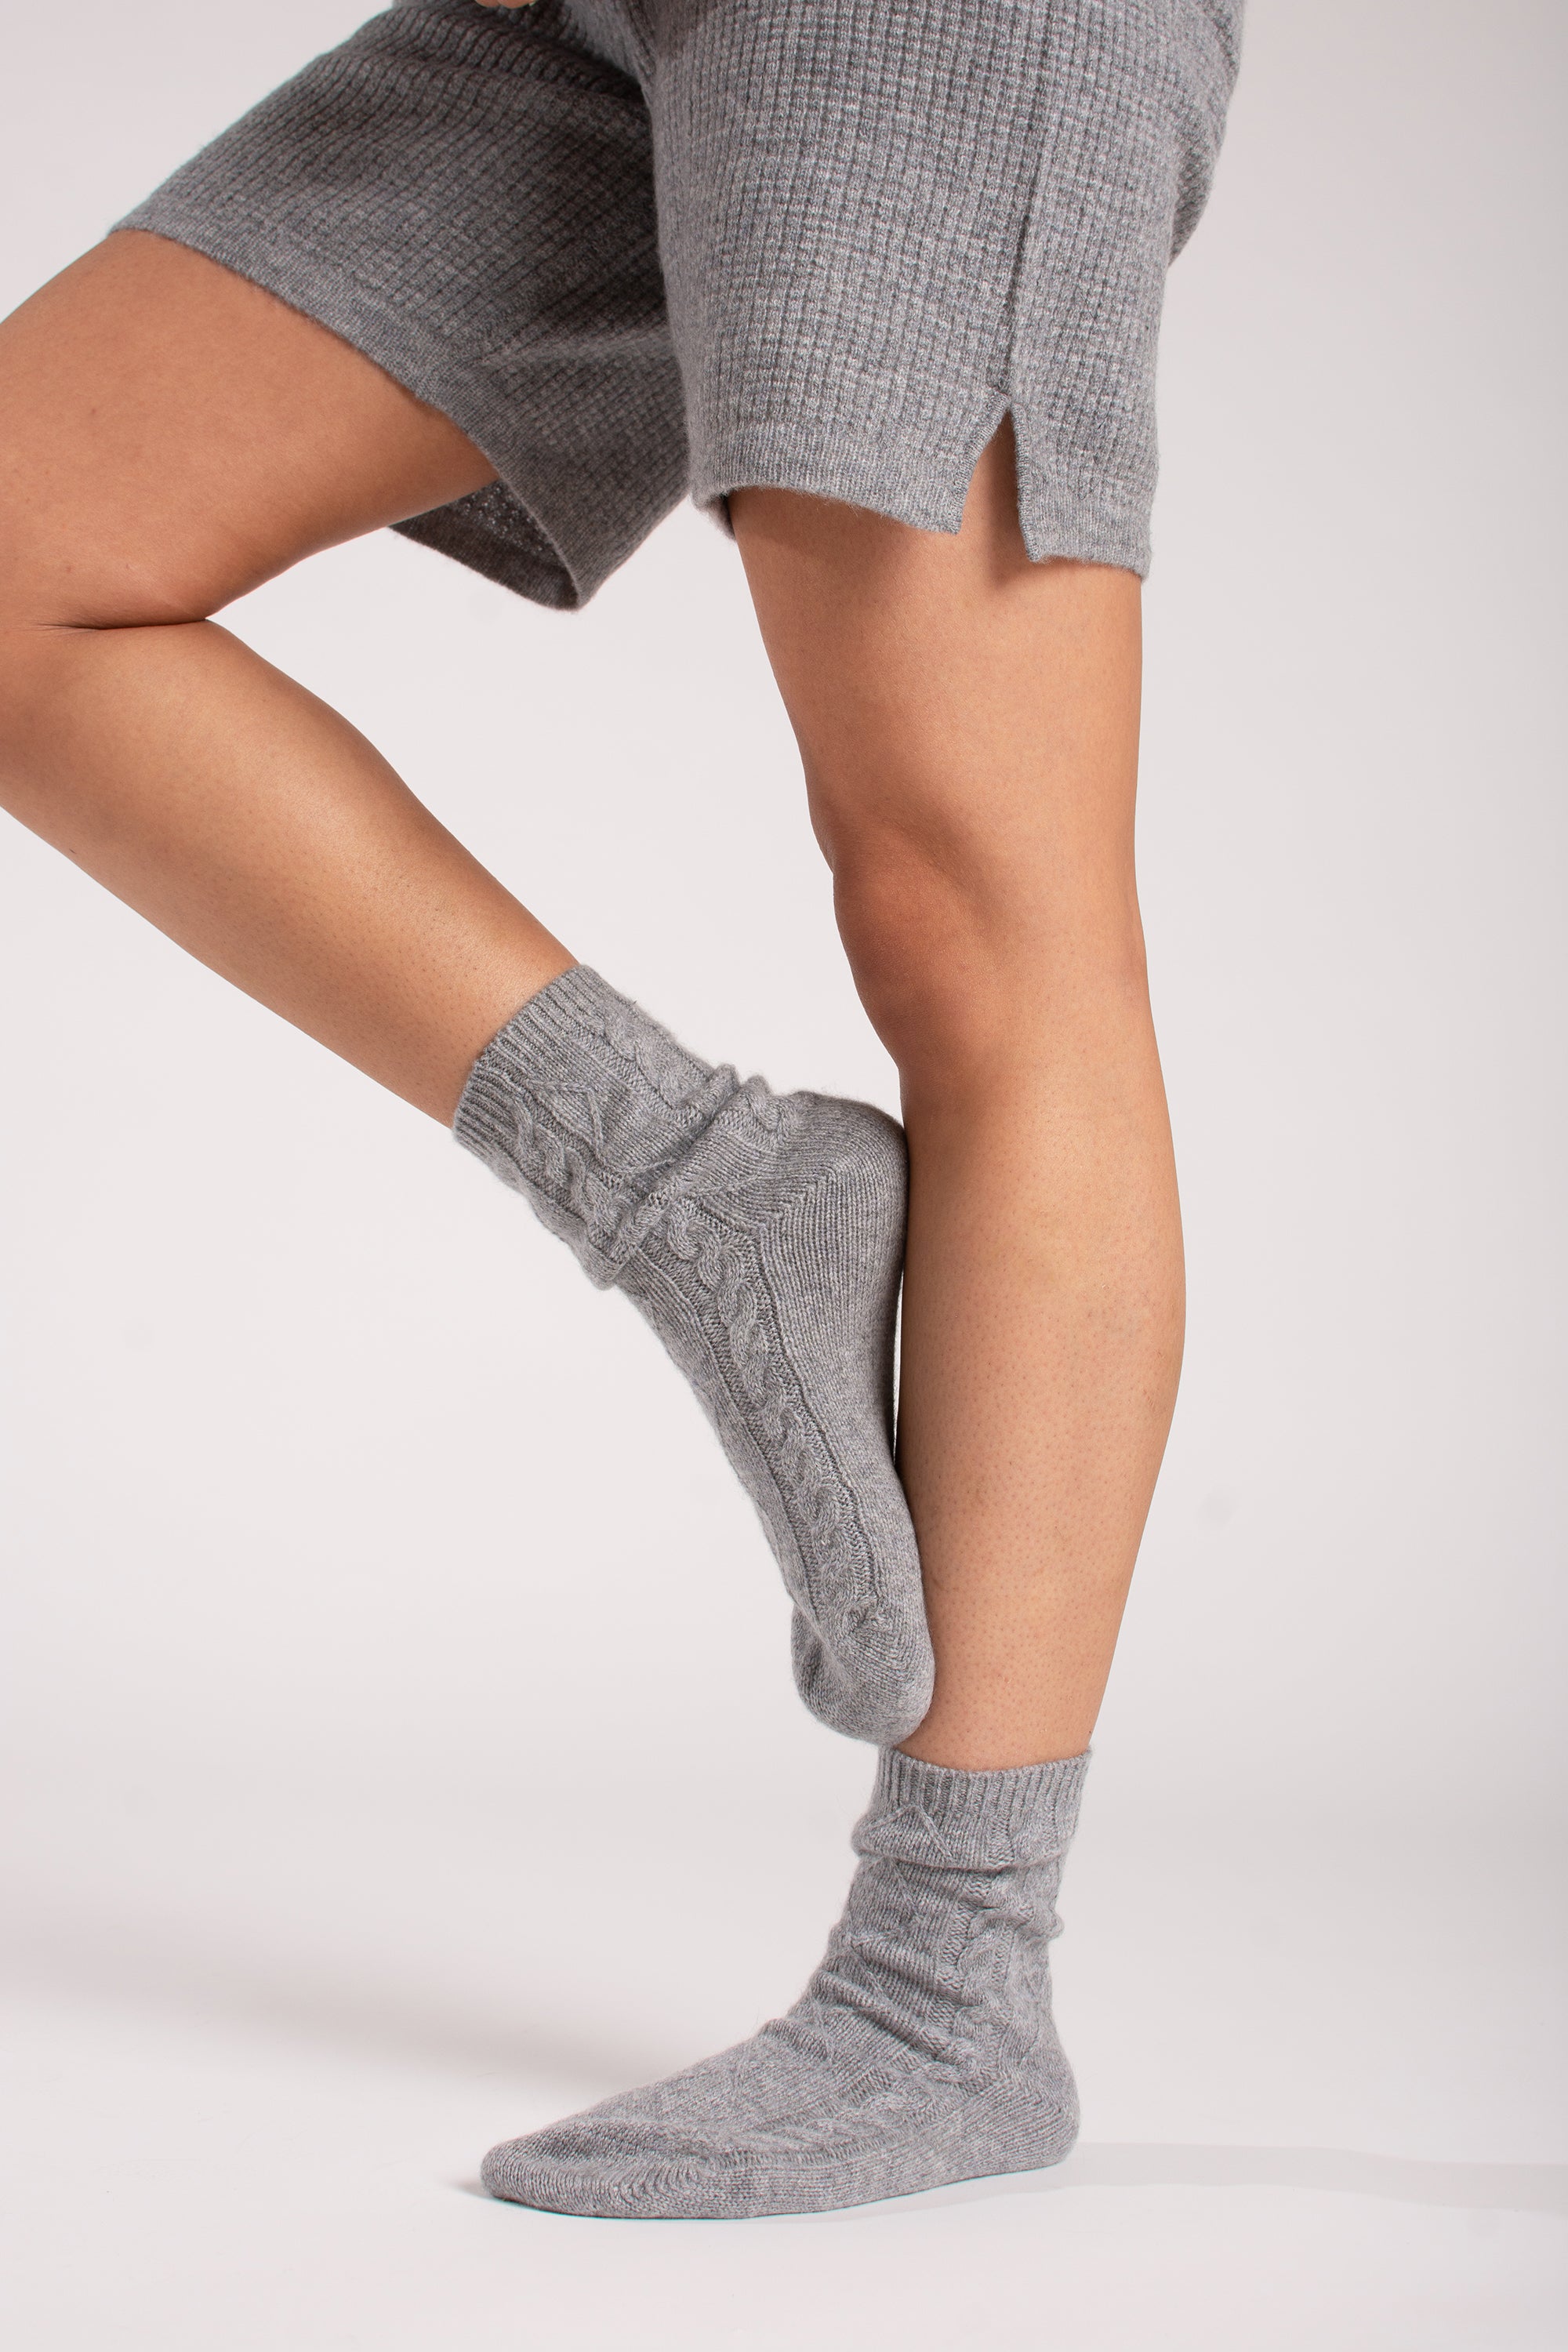 100% cashmere socks cable knit bed sock women grey 